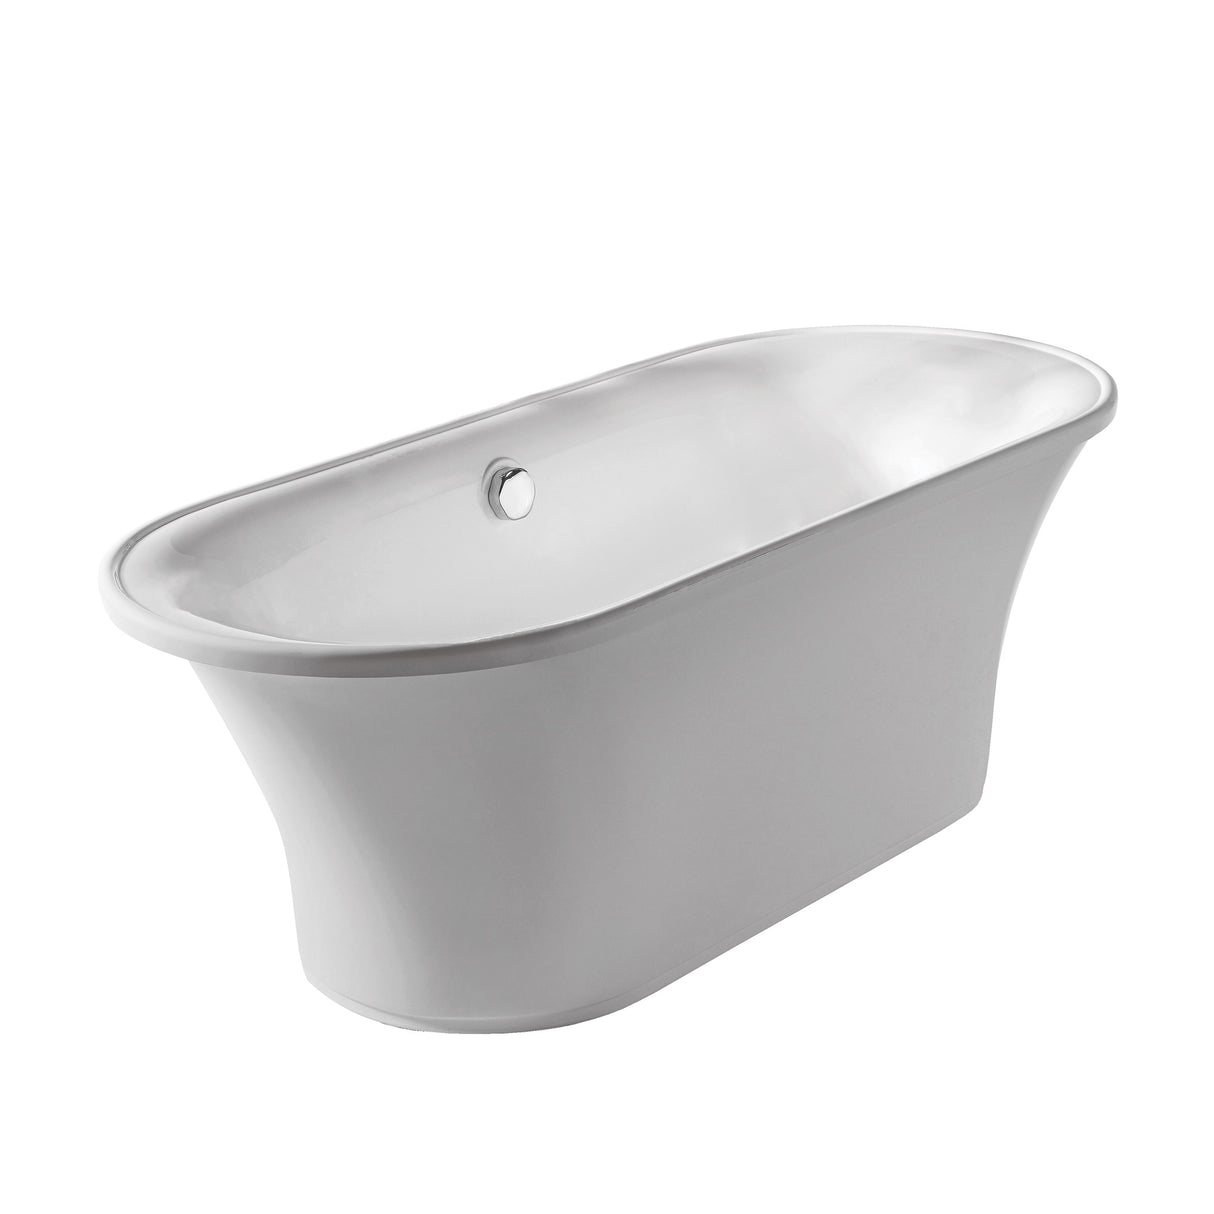 Bathhaus Oval Double Ended Freestanding Lucite Acrylic Bathtub with a Chrome Mechanical Pop-up Waste and Chrome Center Drain with Internal Overflow